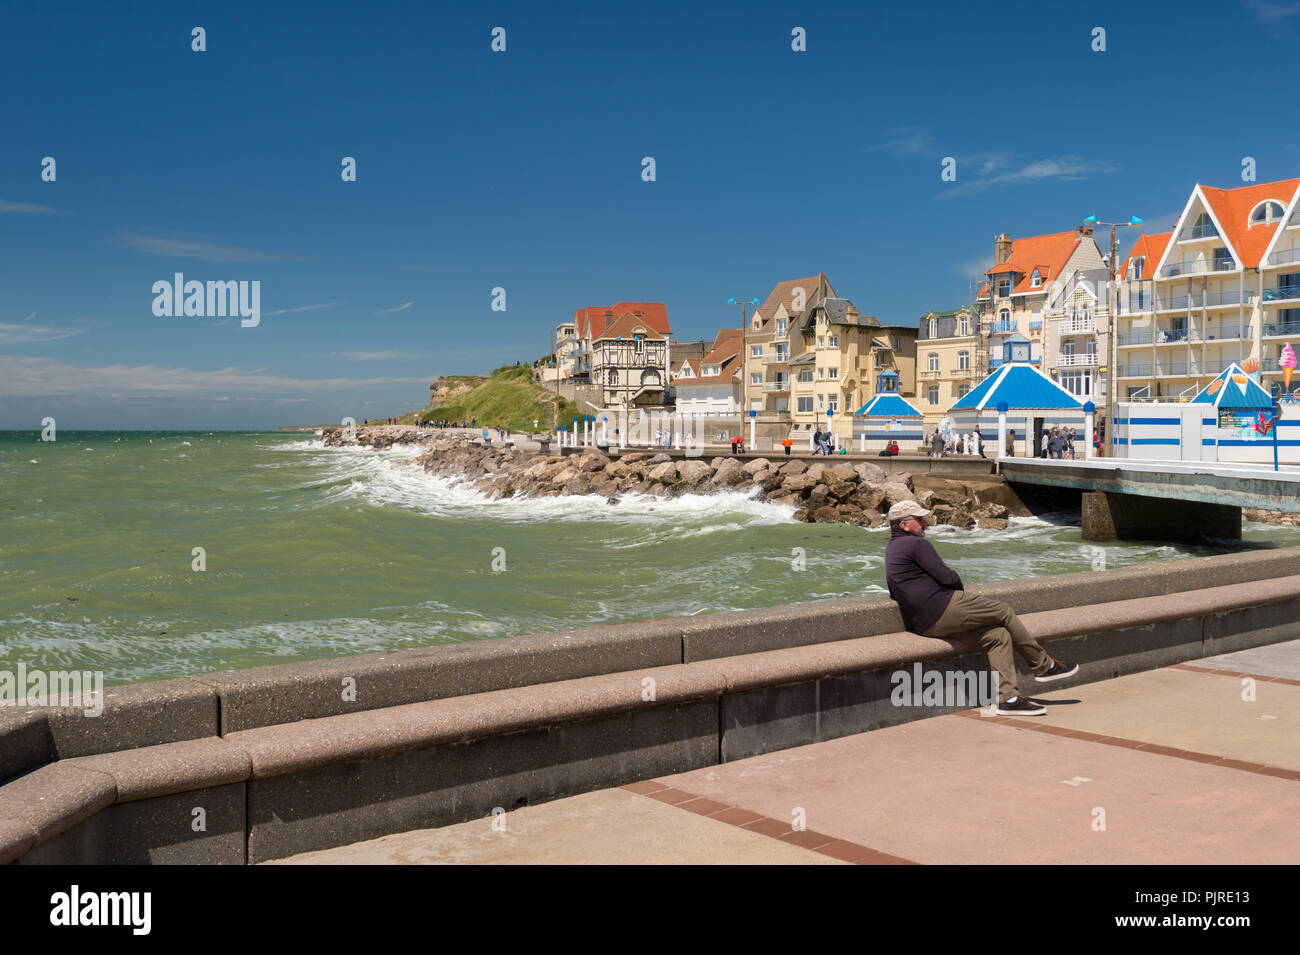 Wimereux, France - 16 June 2018: Sea front promenade in summer. Stock Photo